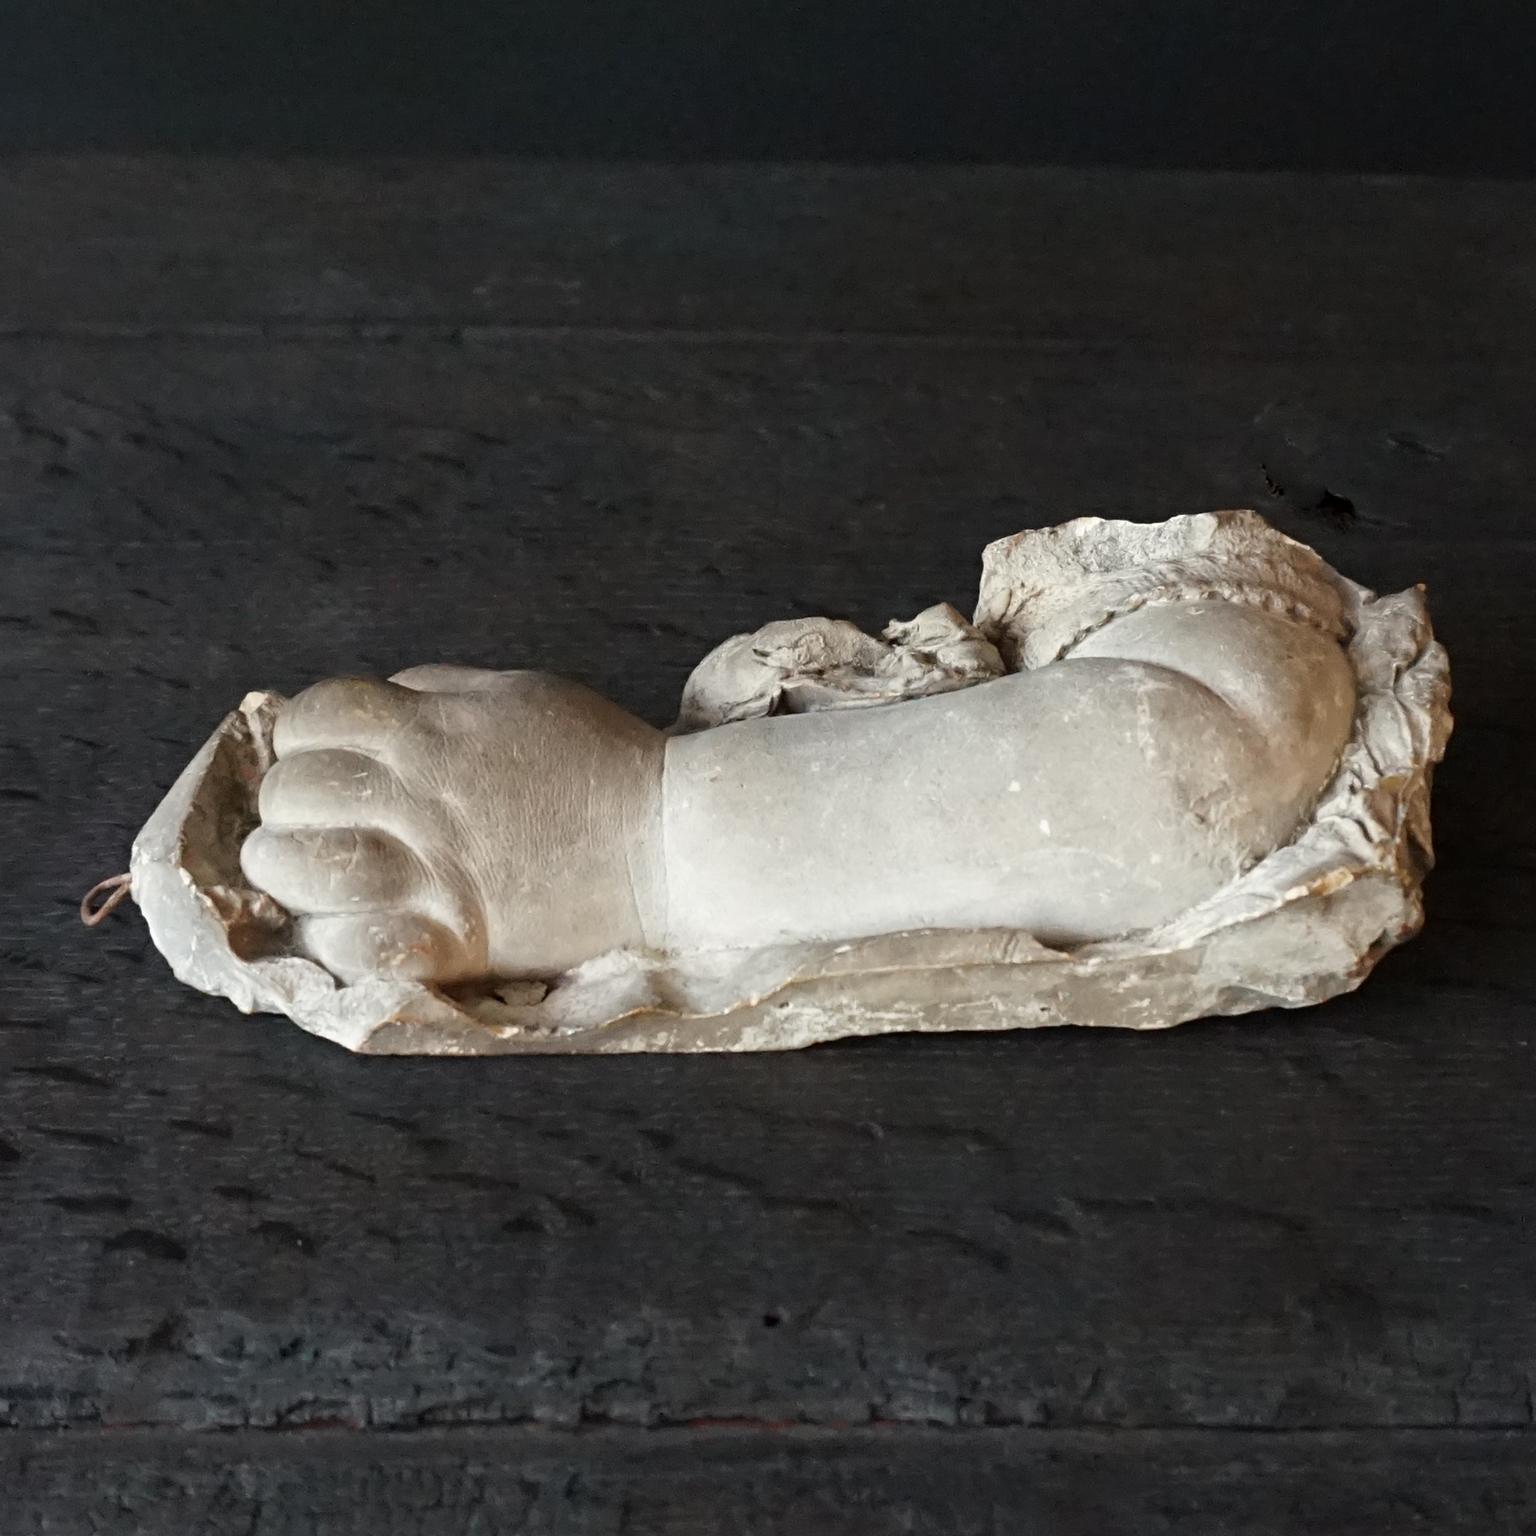 The cutest chubby little 19th century plaster life size and very lifelike study of a Baby's hand and arm with ruffled sleeve detail. You can see the pores on the skin and the softness of the skin of this (I think) a year old sleeping infant.
I've